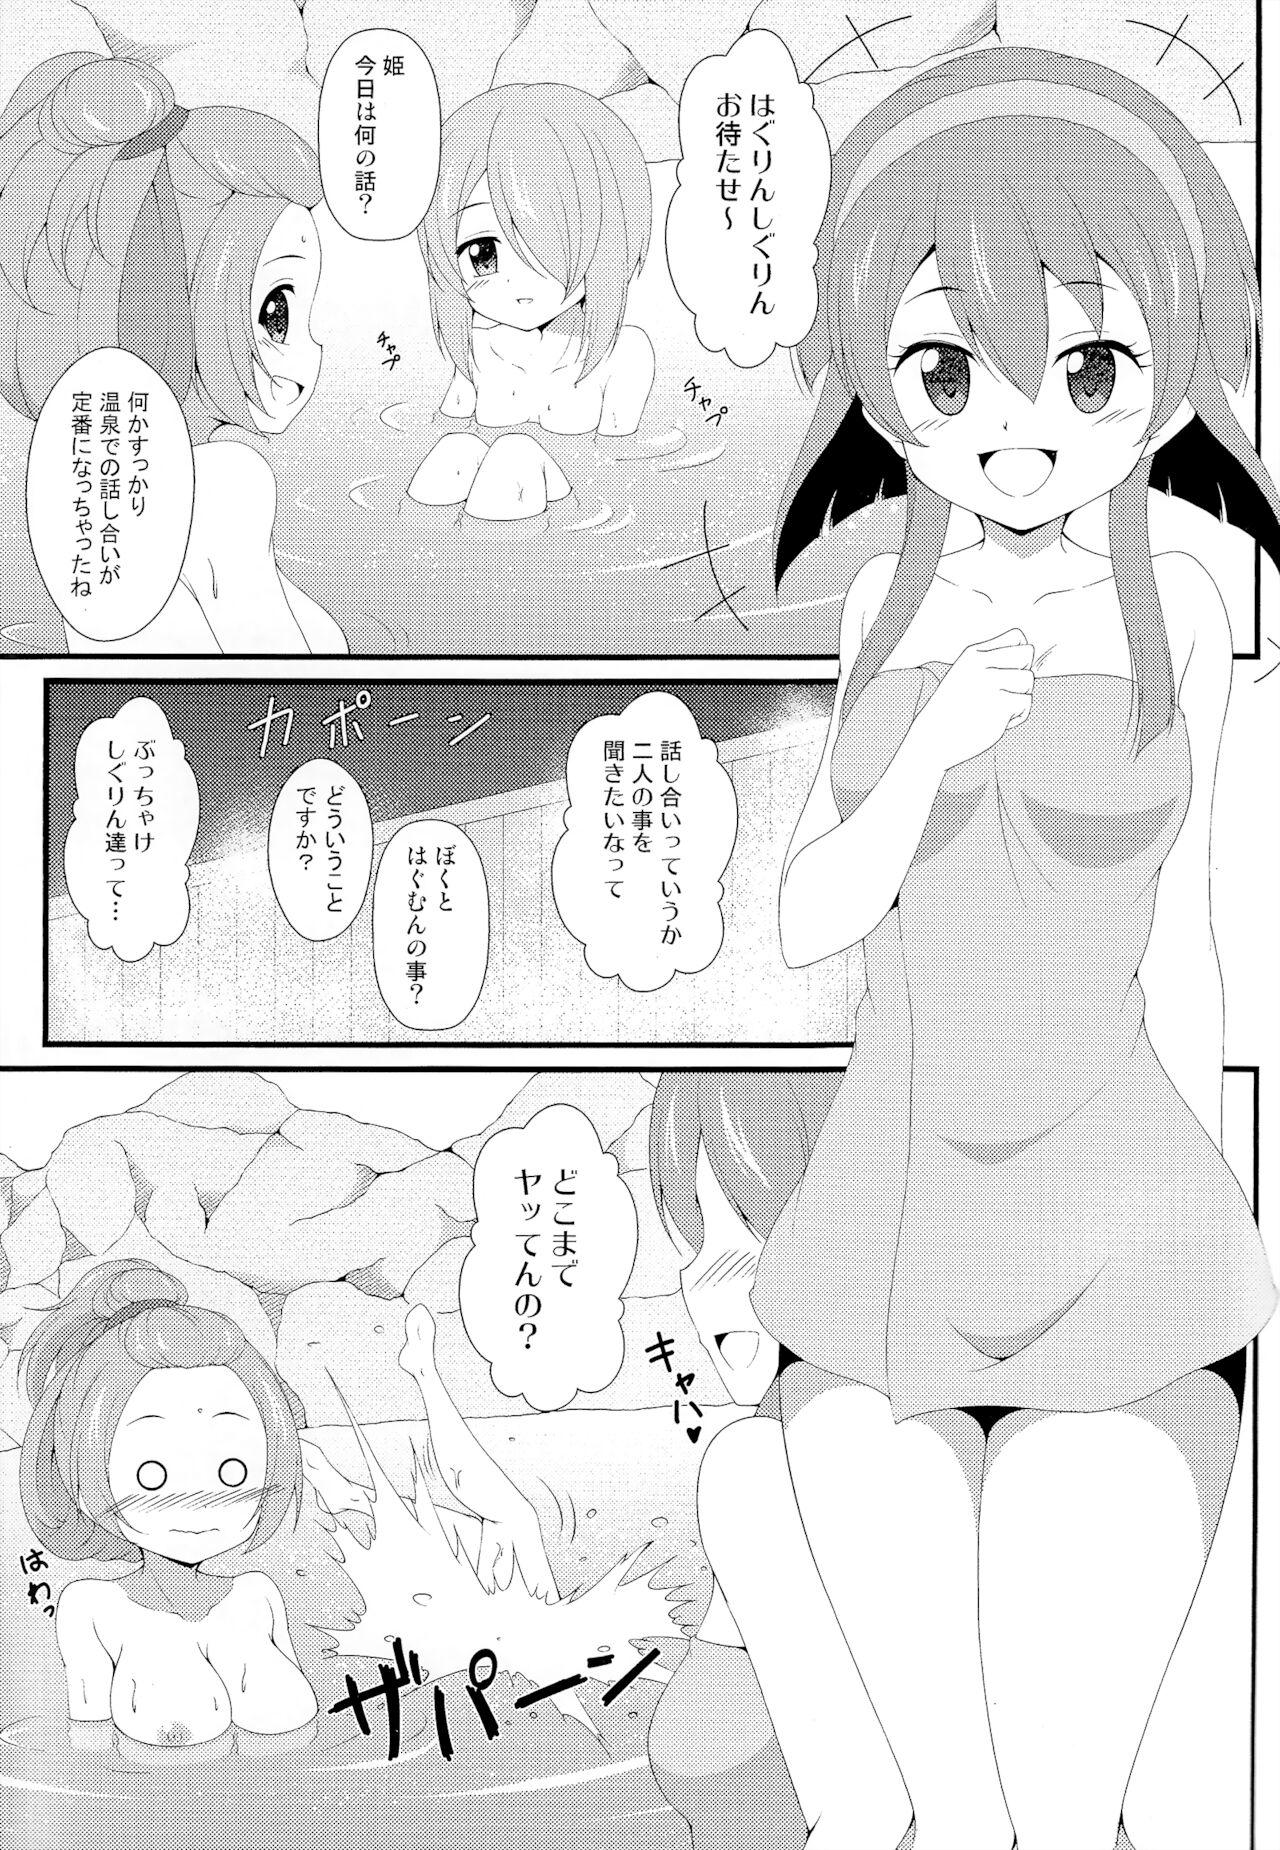 Stepbrother Isshoni Teppen Iko - Puella magi madoka magica side story magia record 18 Year Old - Page 2